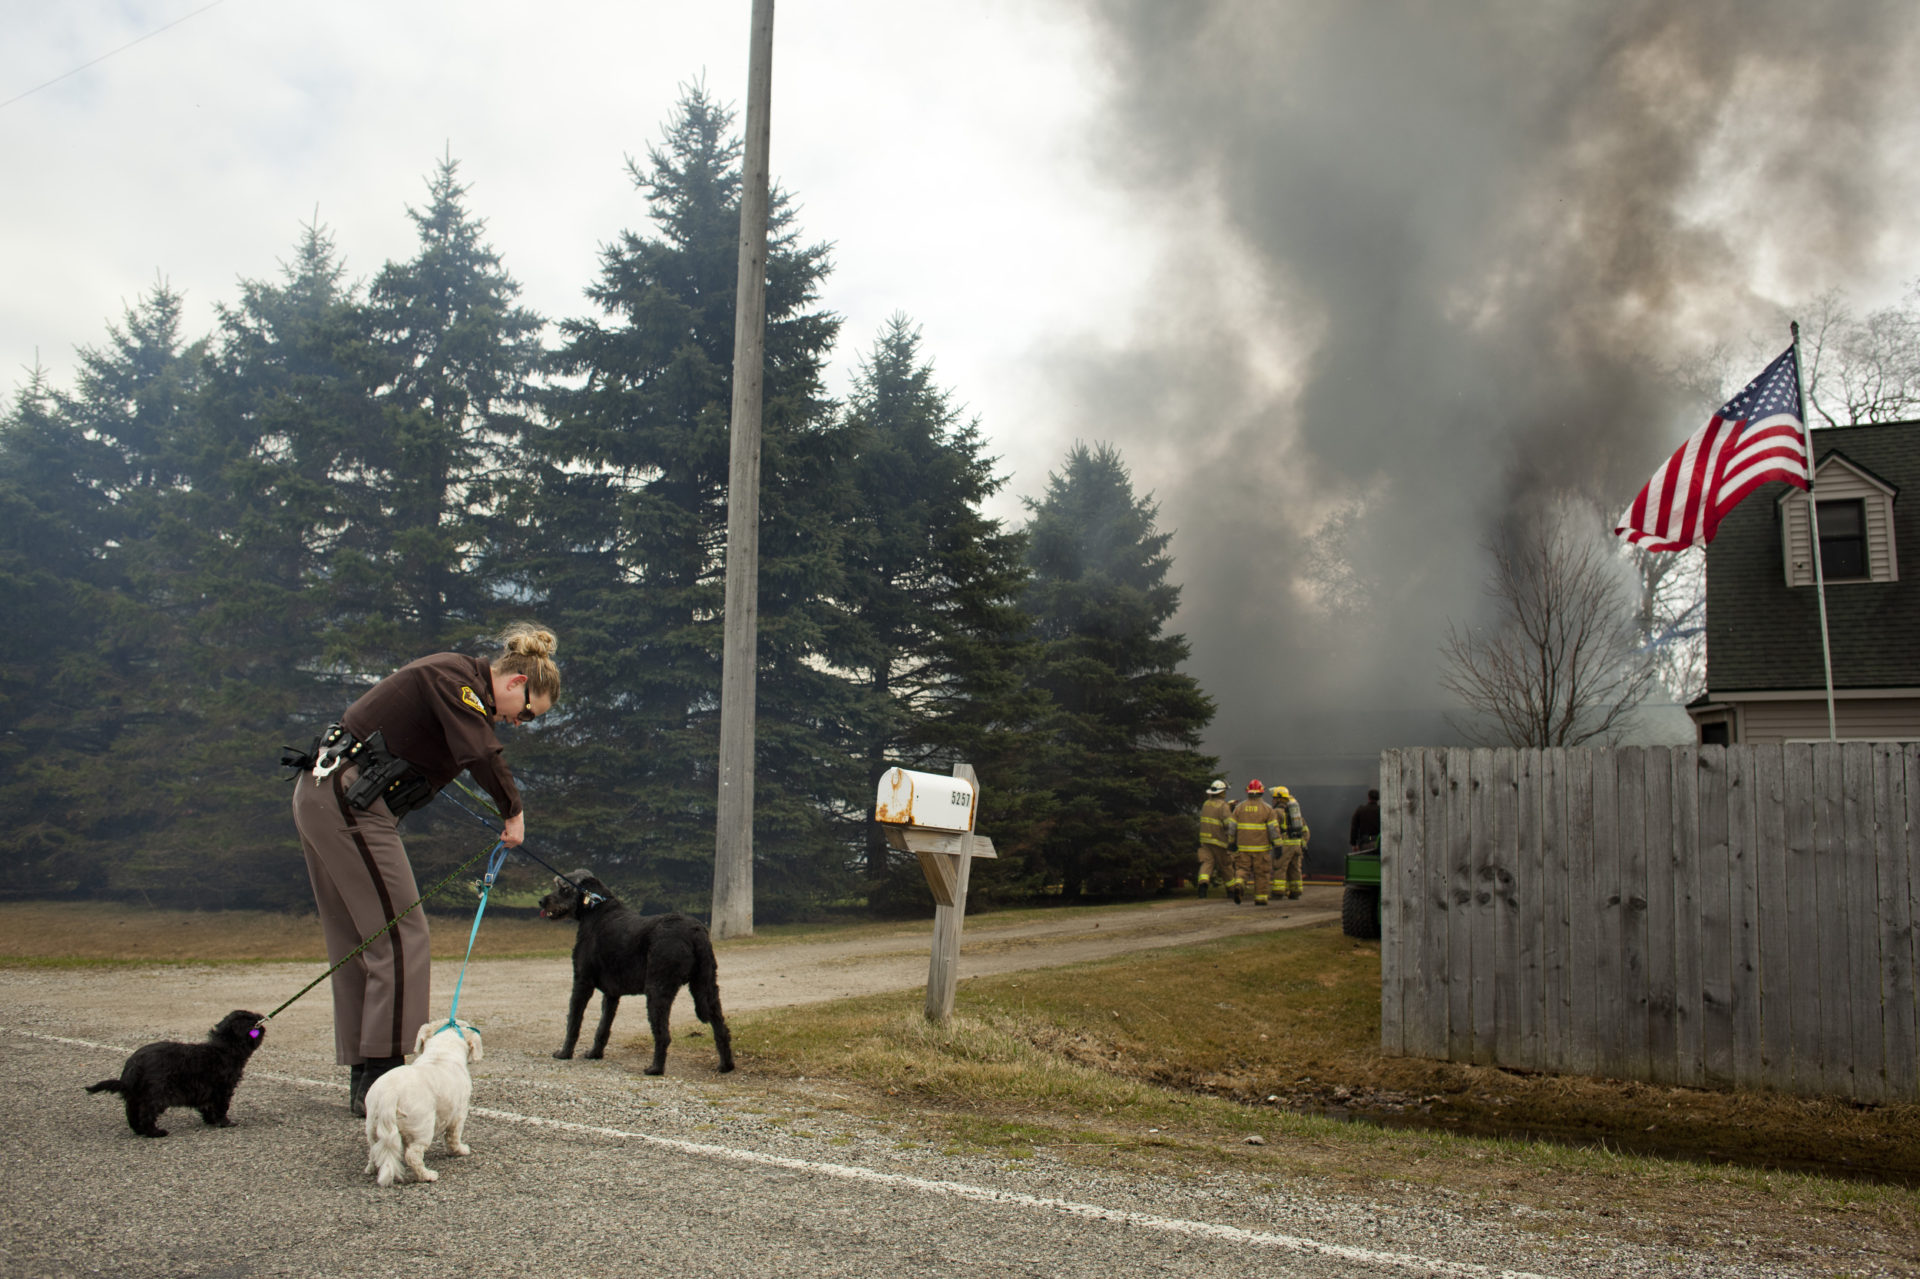 A house burns in the background as a police officer helps dogs